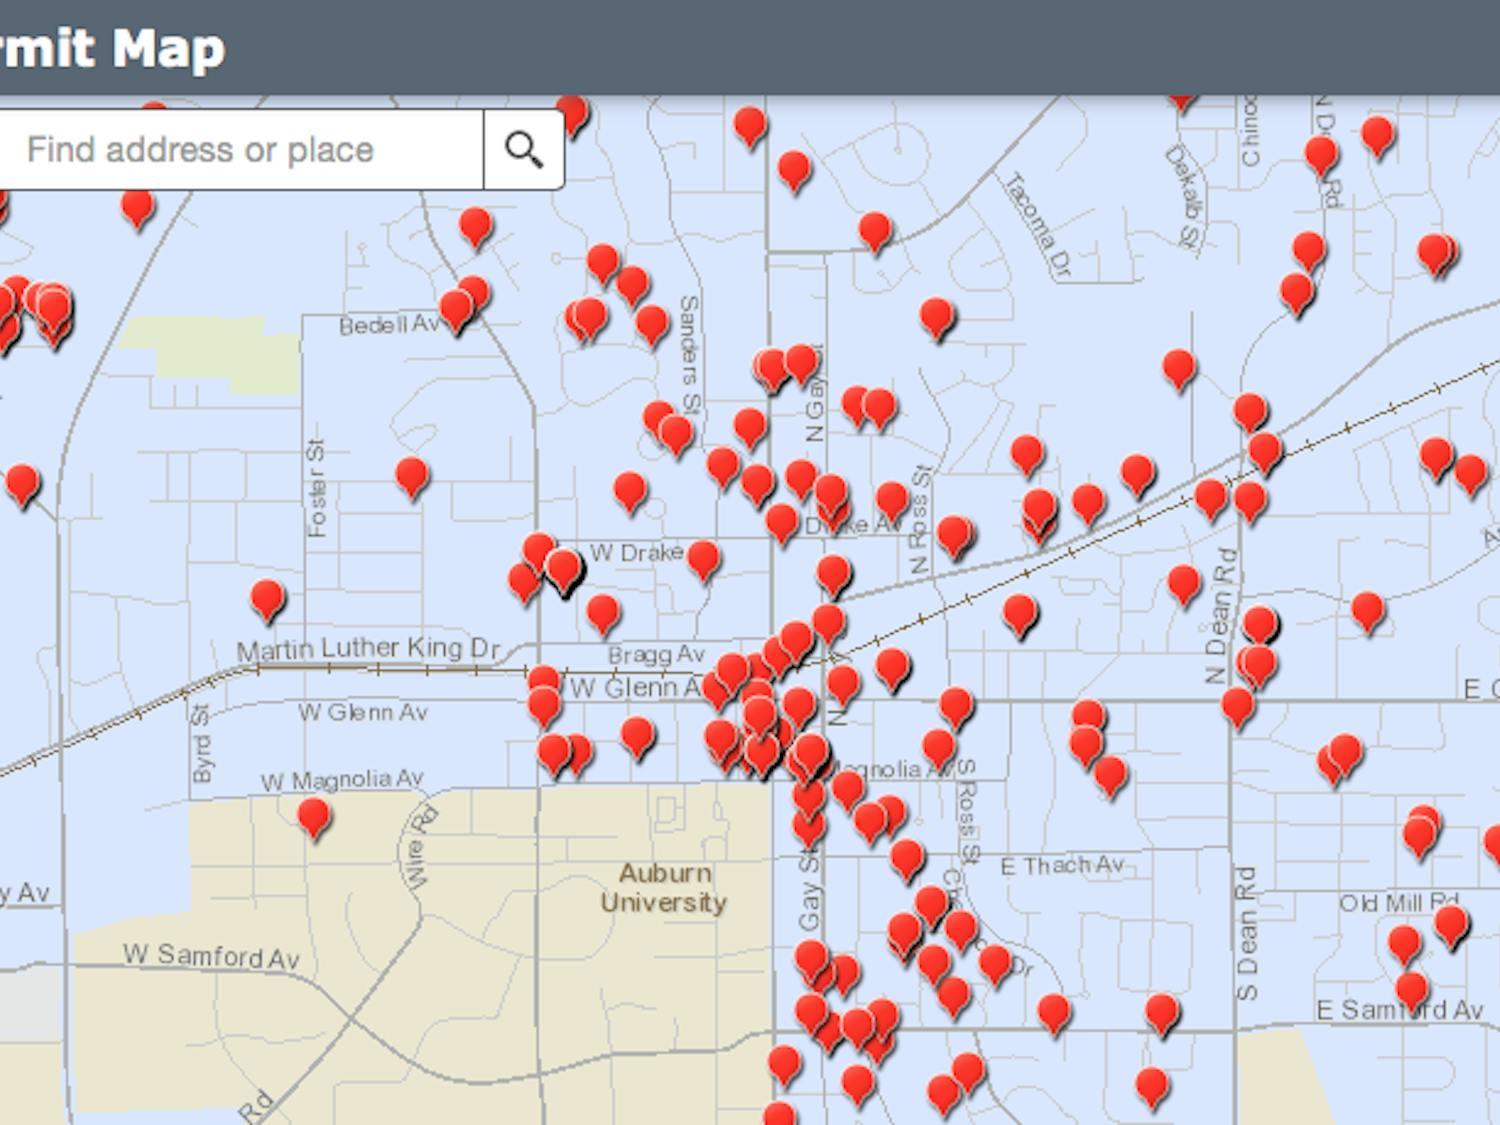 The city of Auburn's new&nbsp;interactive construction permit map displays all active construction permits in the city with a red pin.